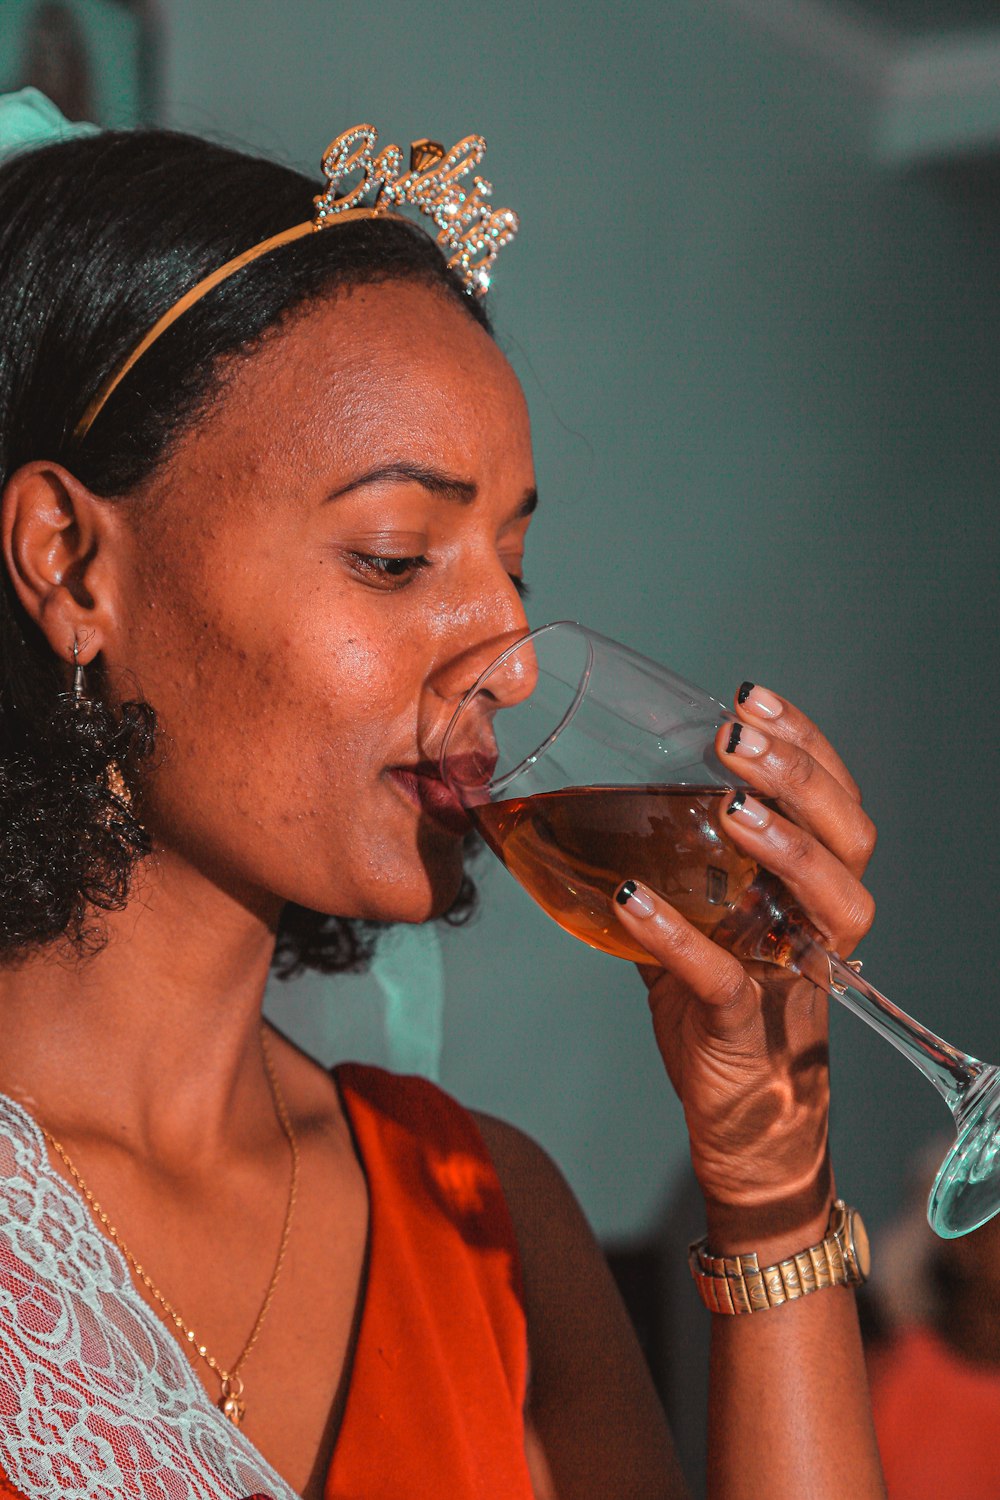 a person drinking a glass of wine